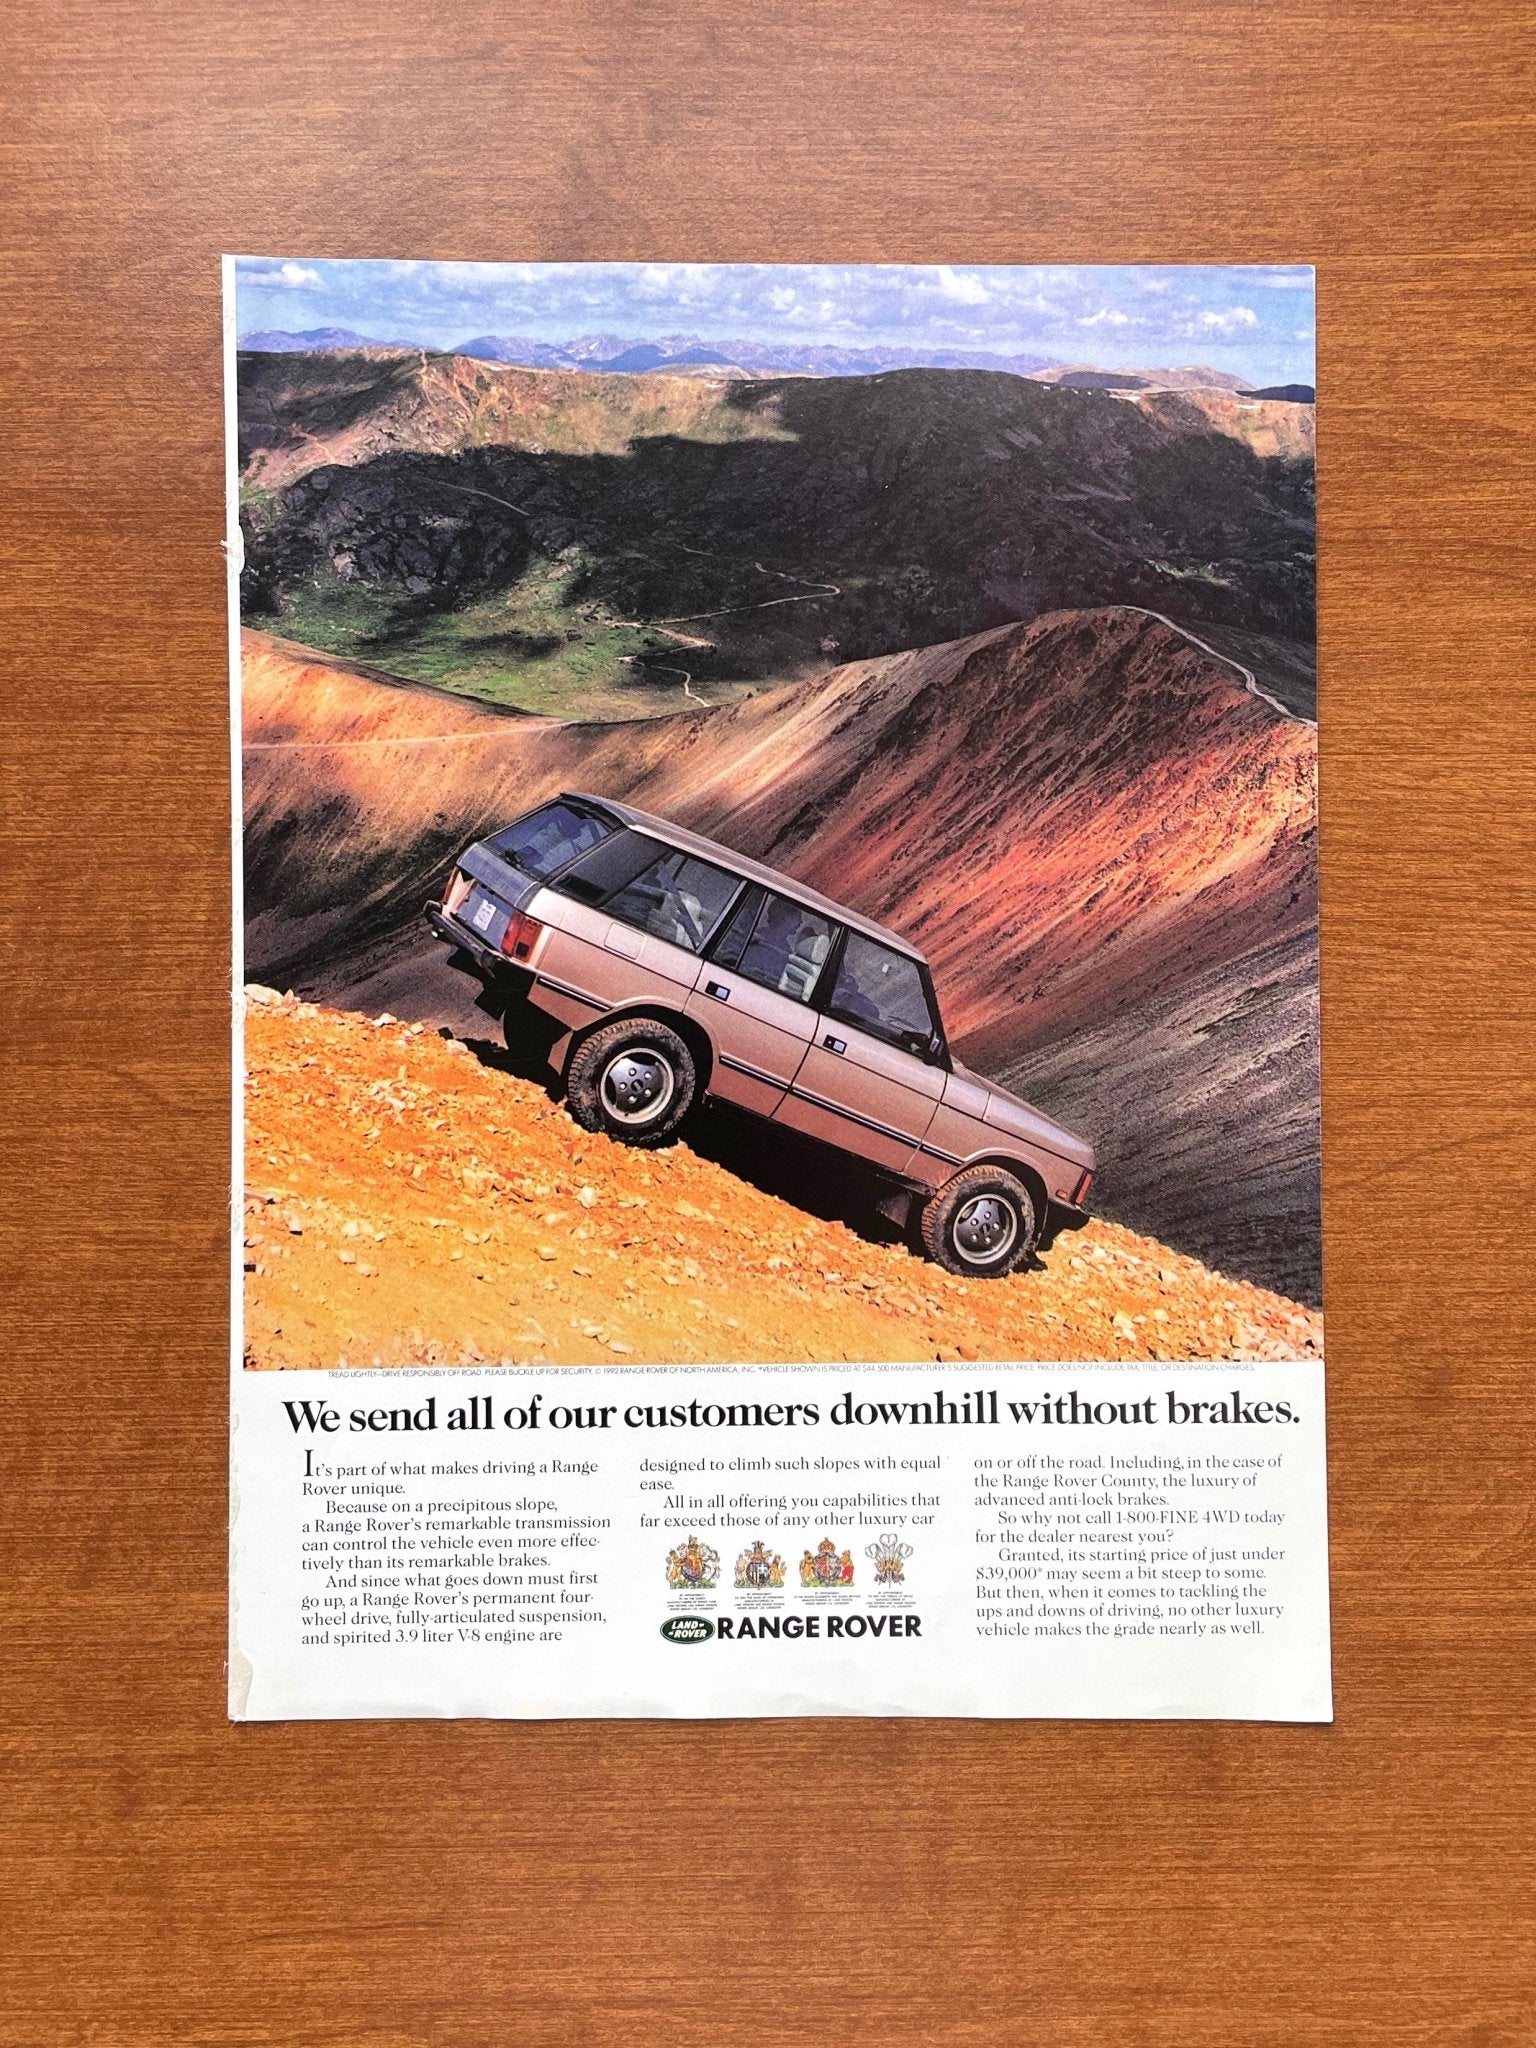 1992 Range Rover "downhill without brakes." Advertisement